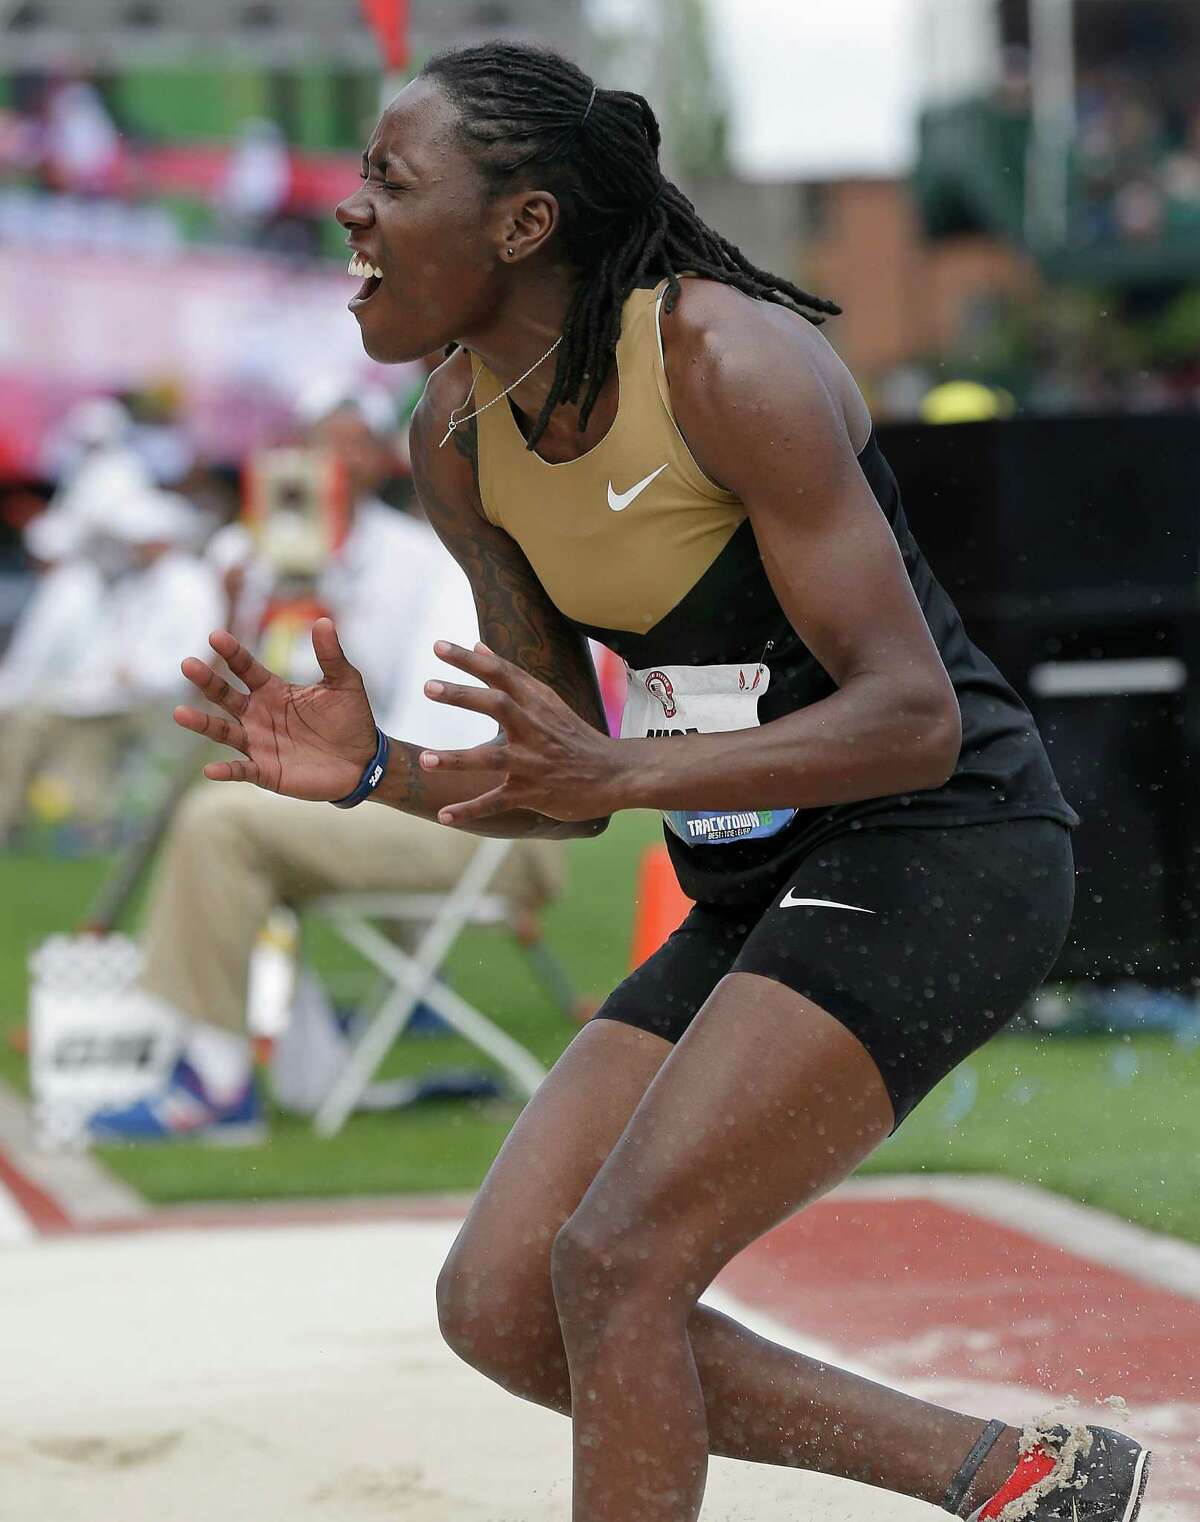 Brittney Reese celebrates a jump in the women's long jump final at the U.S. Olympic Track and Field Trials Sunday, July 1, 2012, in Eugene, Ore. (AP Photo/Charlie Riedel)